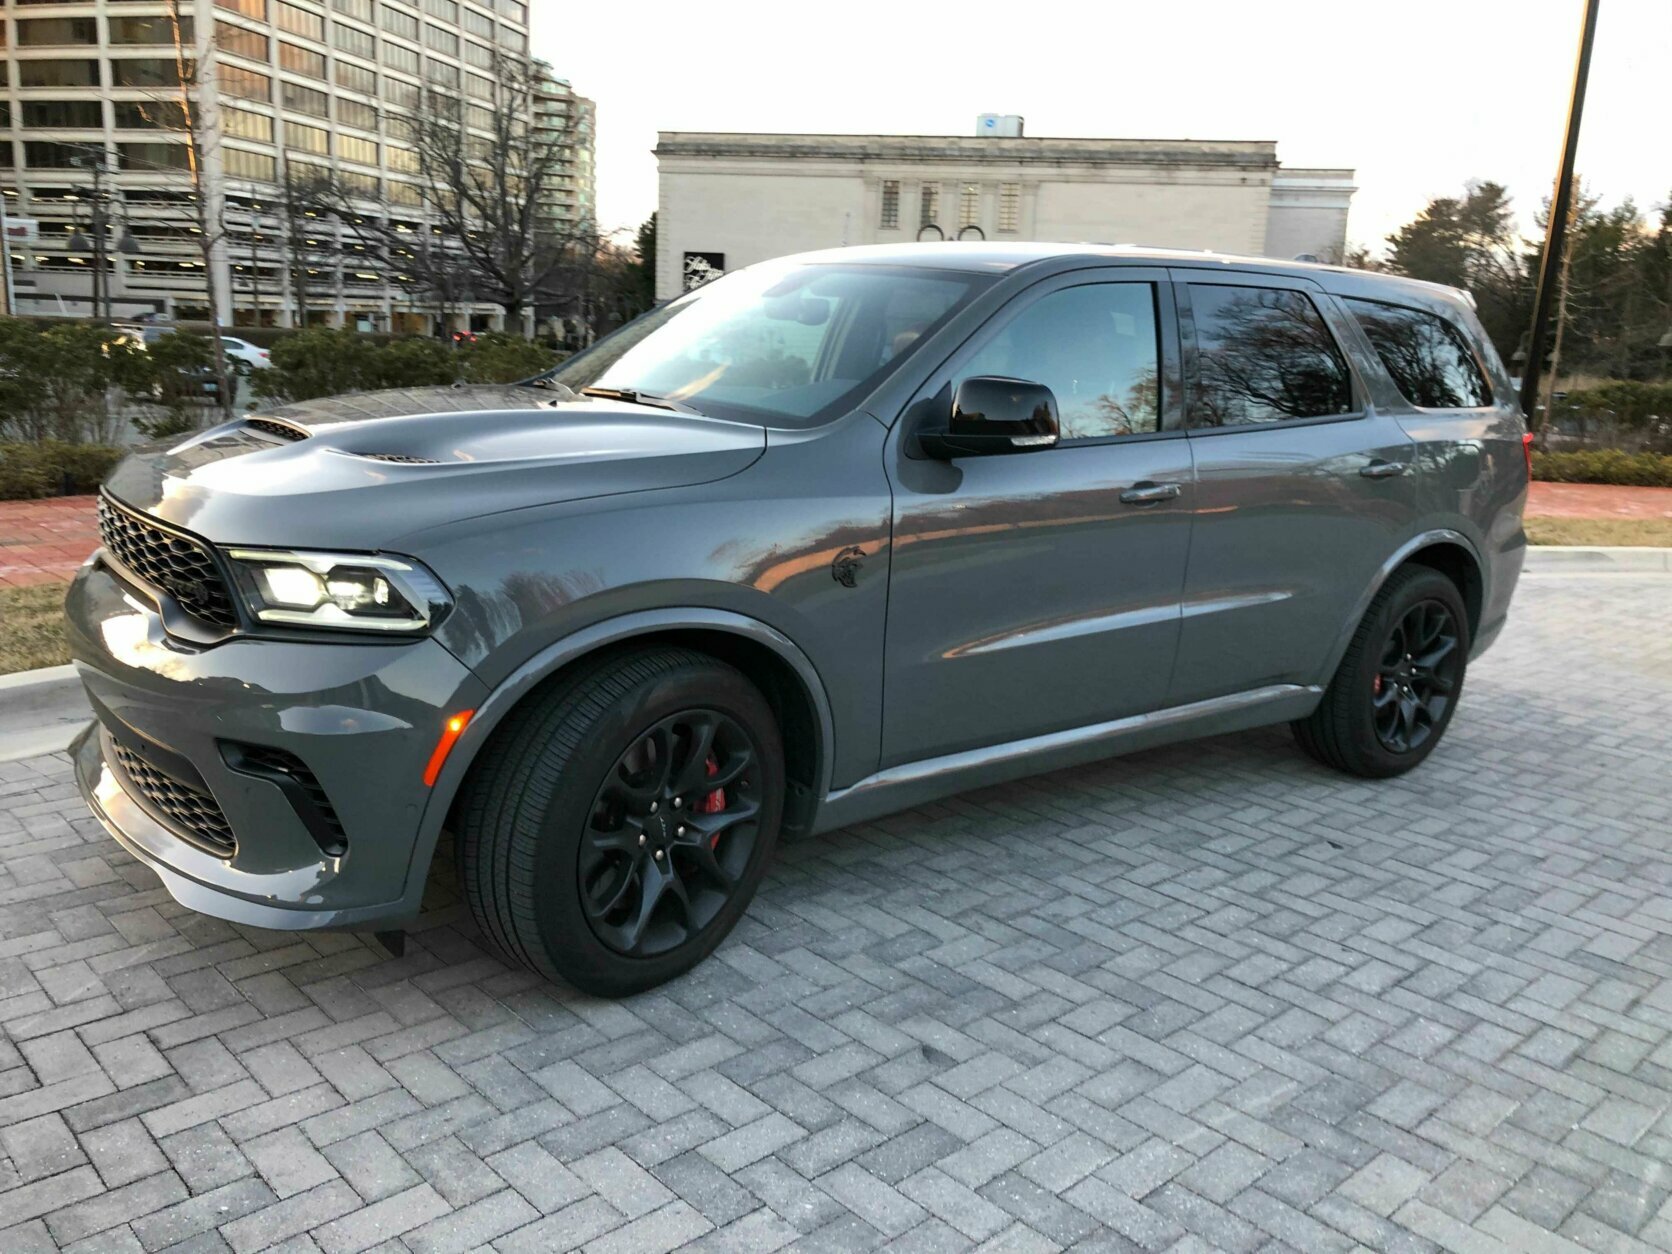 Car Review: 2021 Dodge Durango SRT Hellcat is 710hp SUV with space for ...